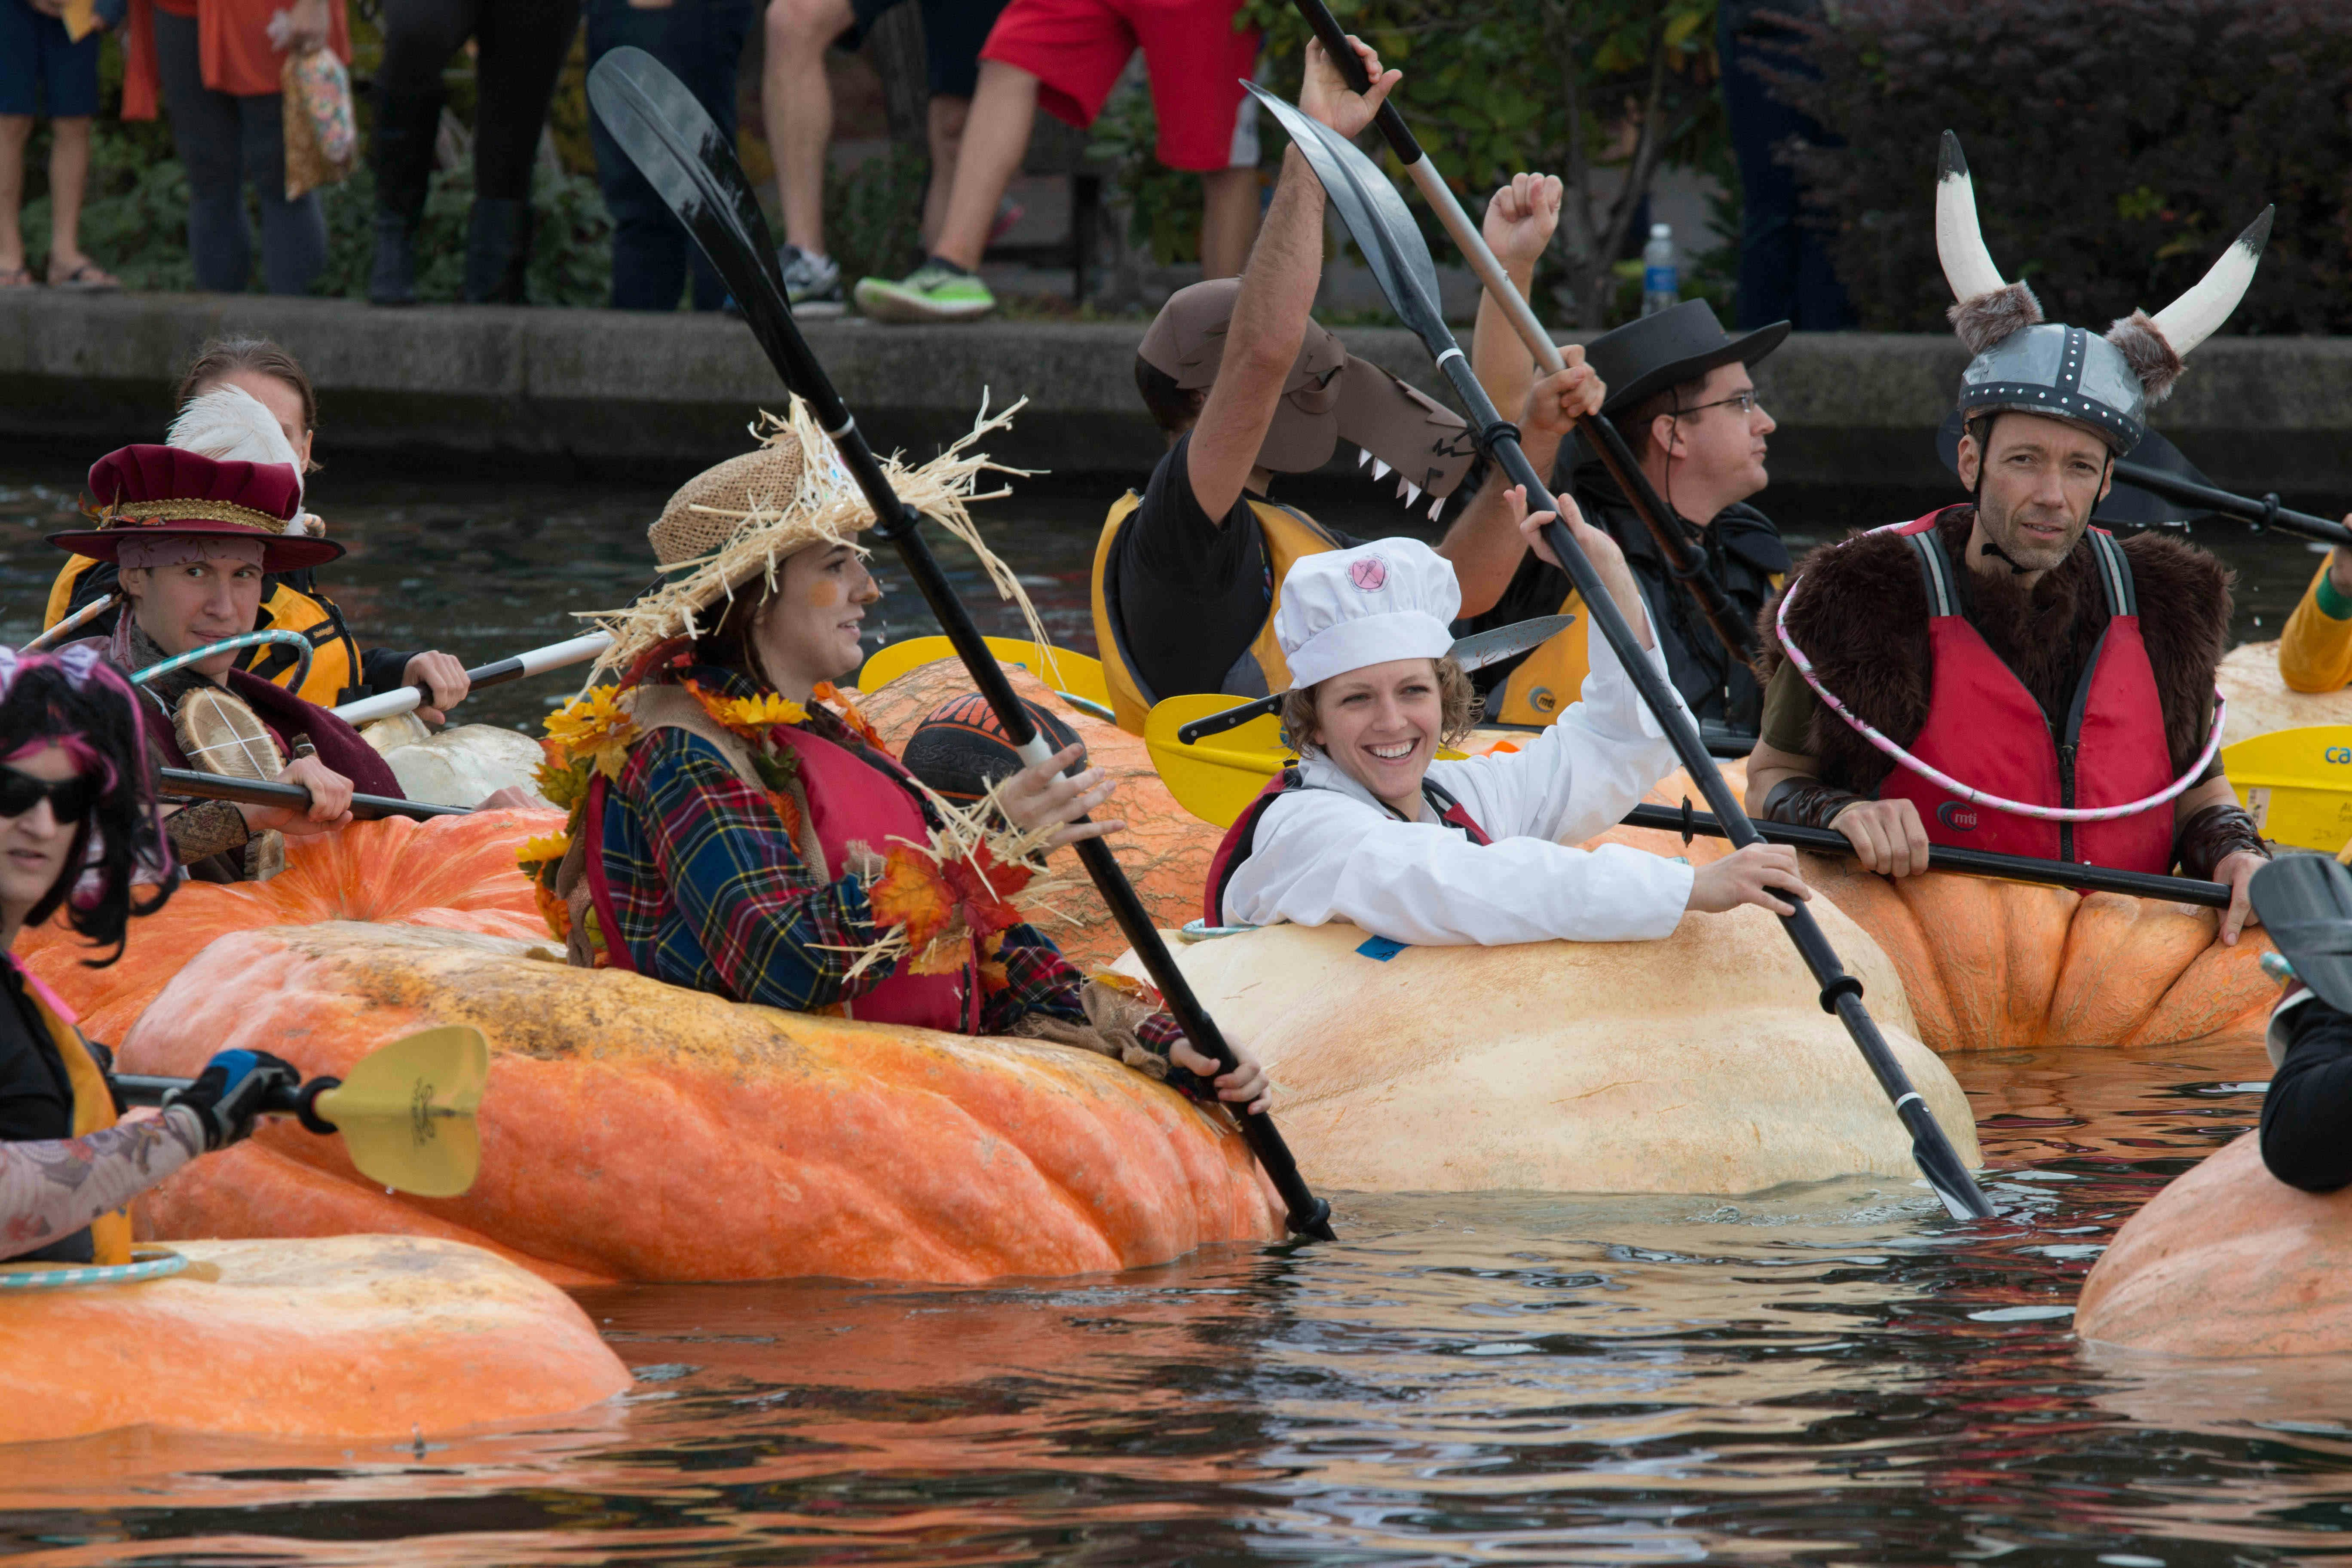 Vegetable-growing enthusiasts will take part in a bizarre pumpkin regatta in Oregon this month